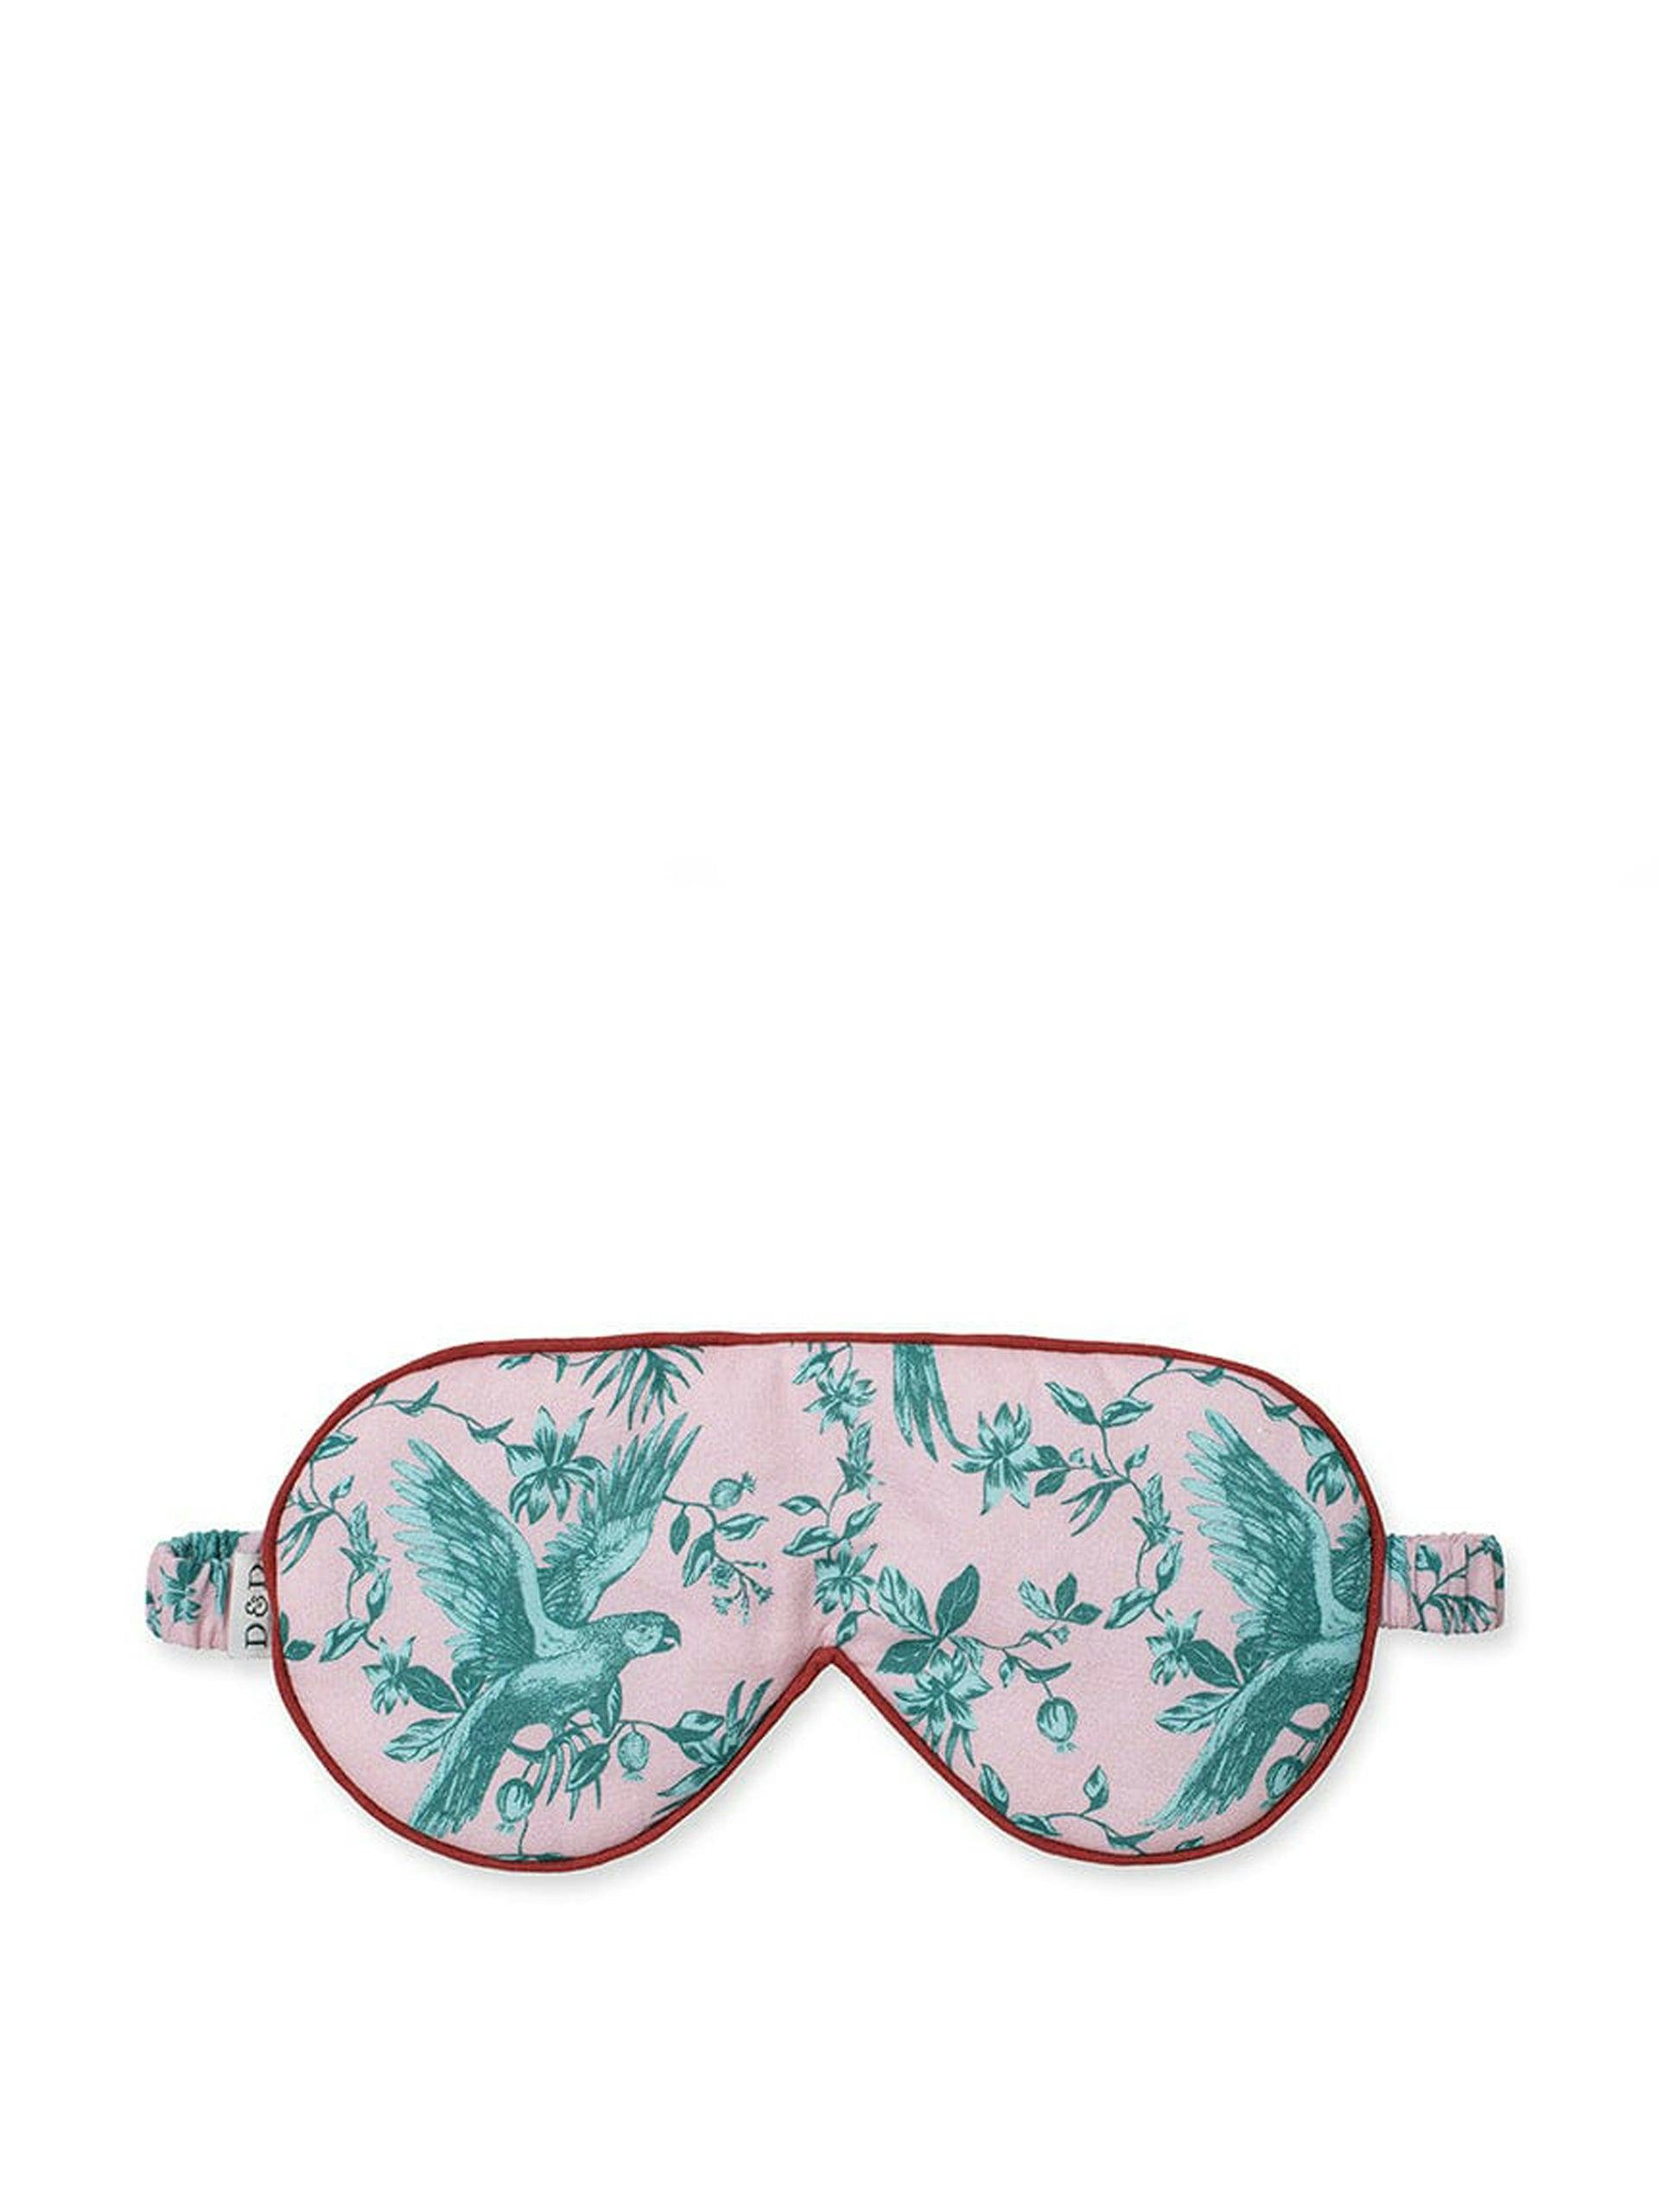 Cotton luxe eye mask in pink and blue Bromley Parrot print